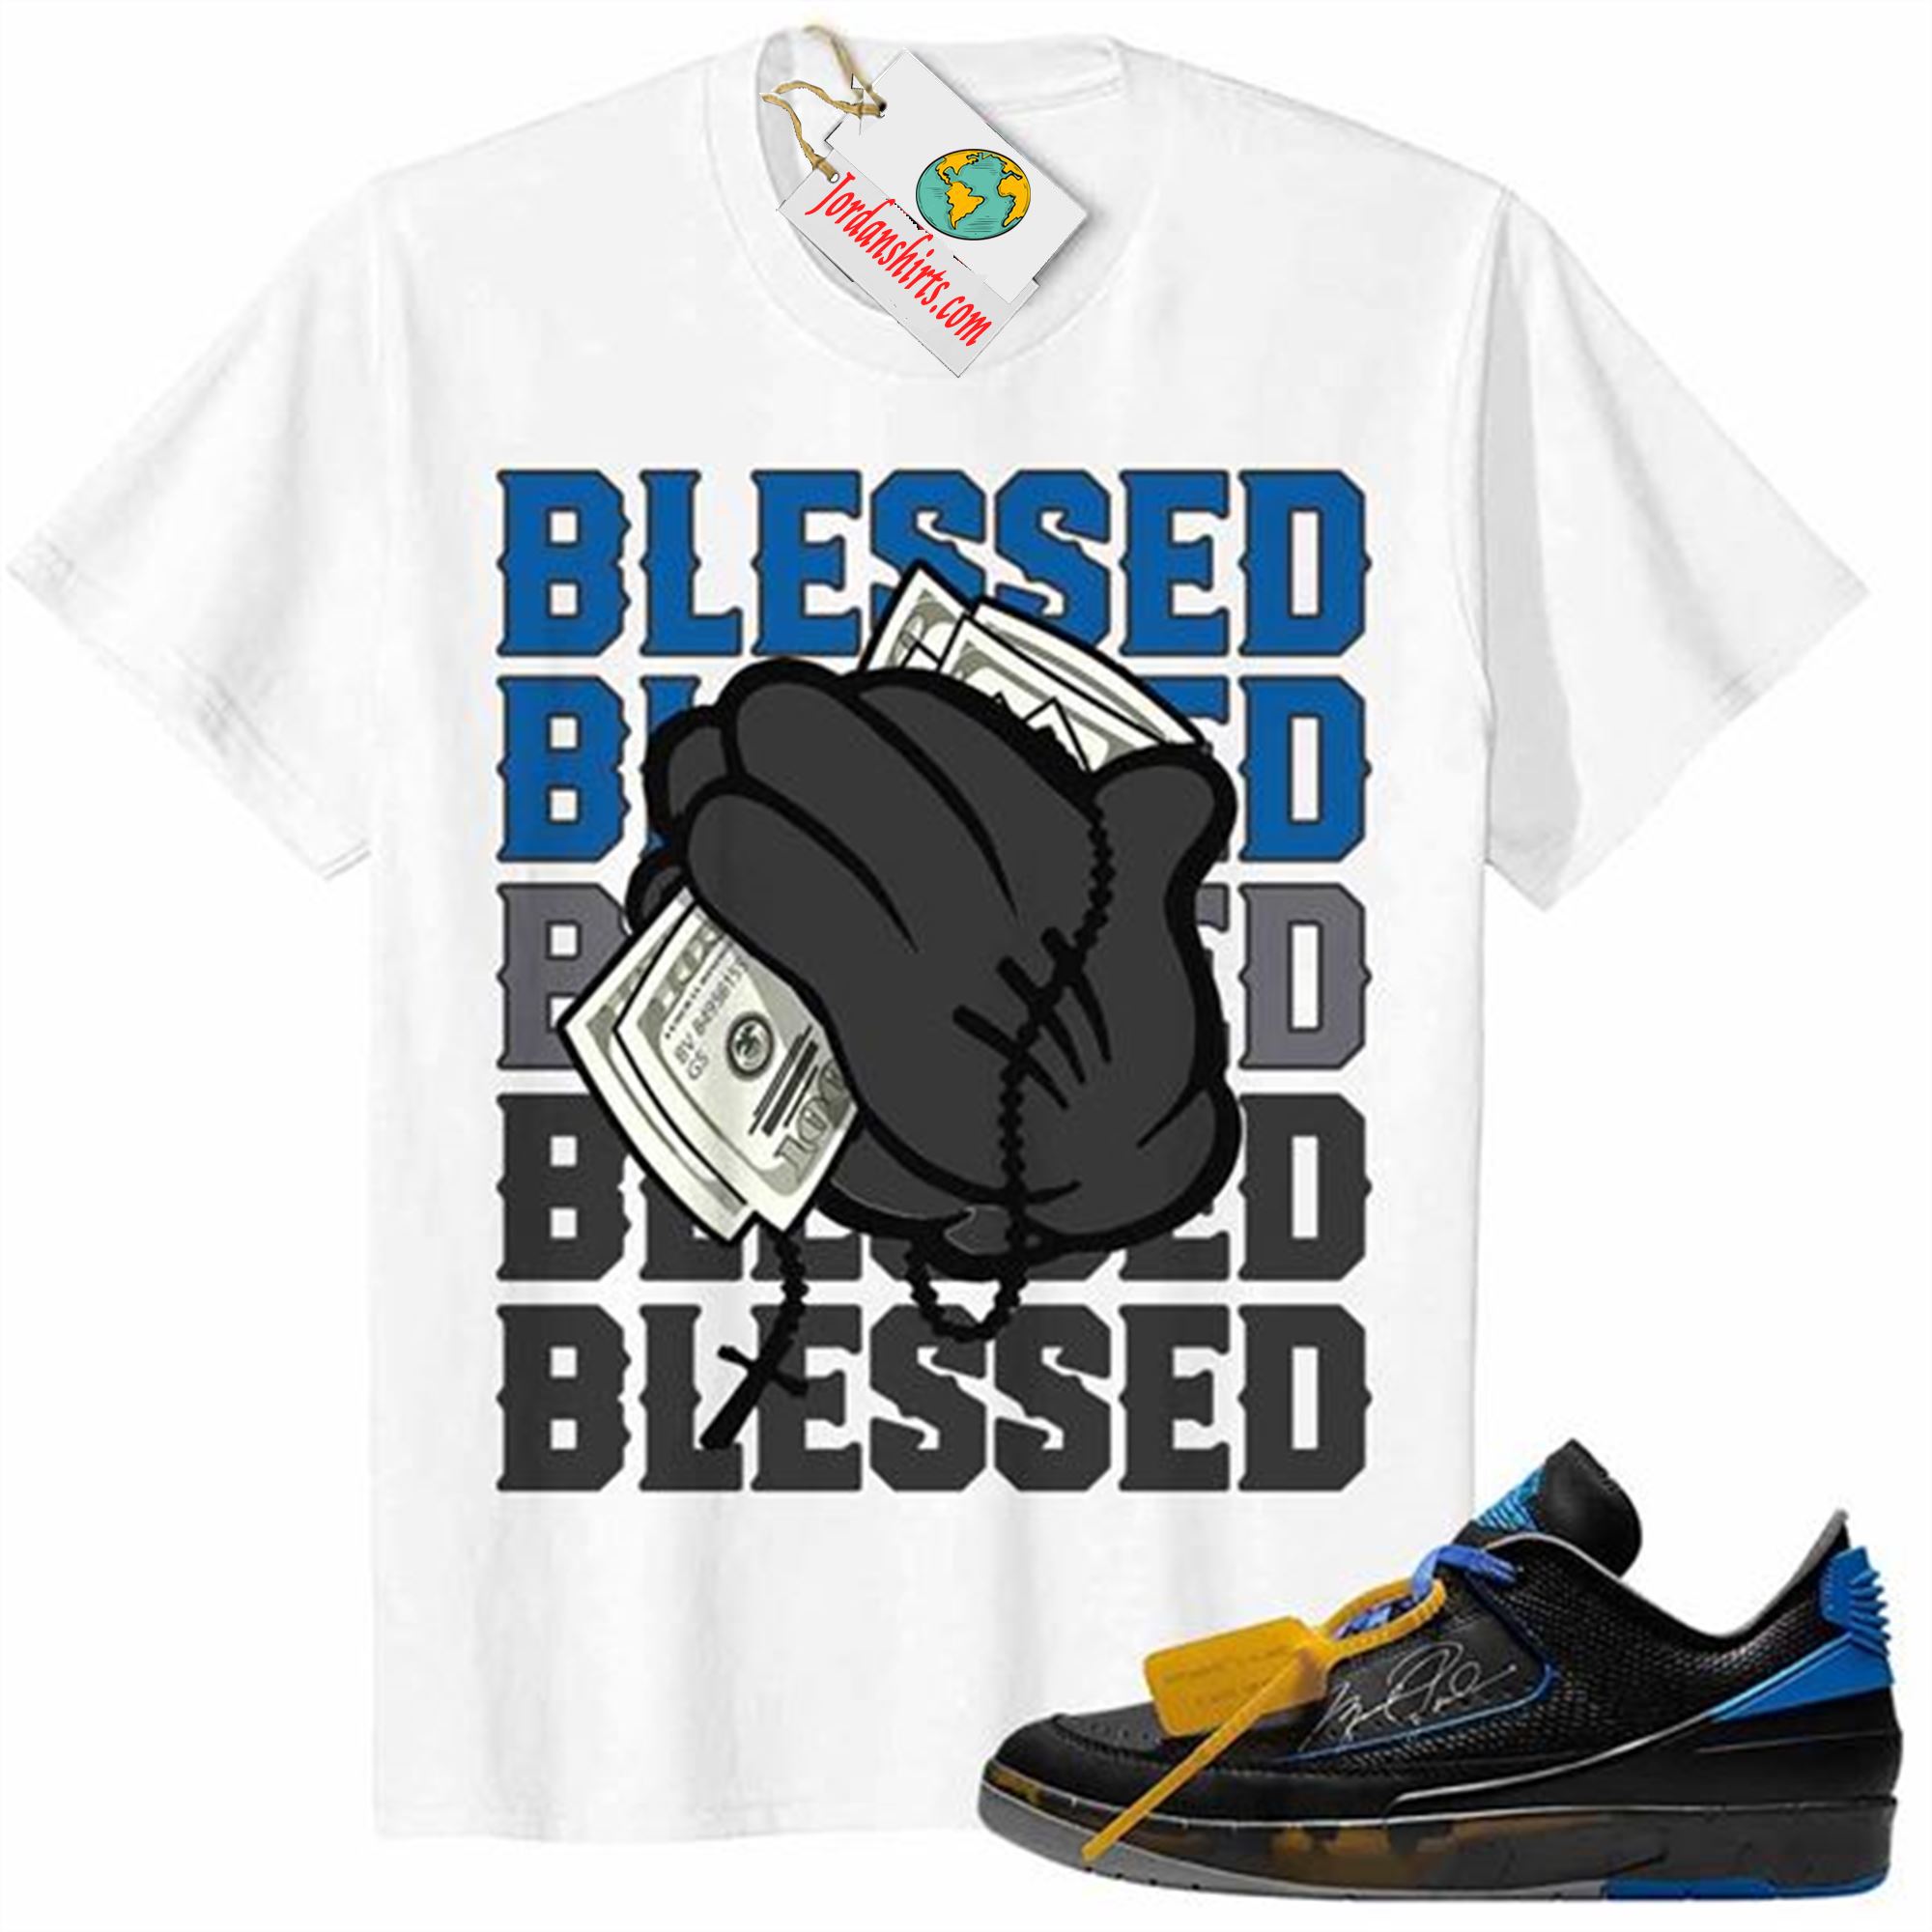 Jordan 2 Shirt, Mouse Blessed White Air Jordan 2 Low X Off-white Black And Varsity Royal 2s Size Up To 5xl